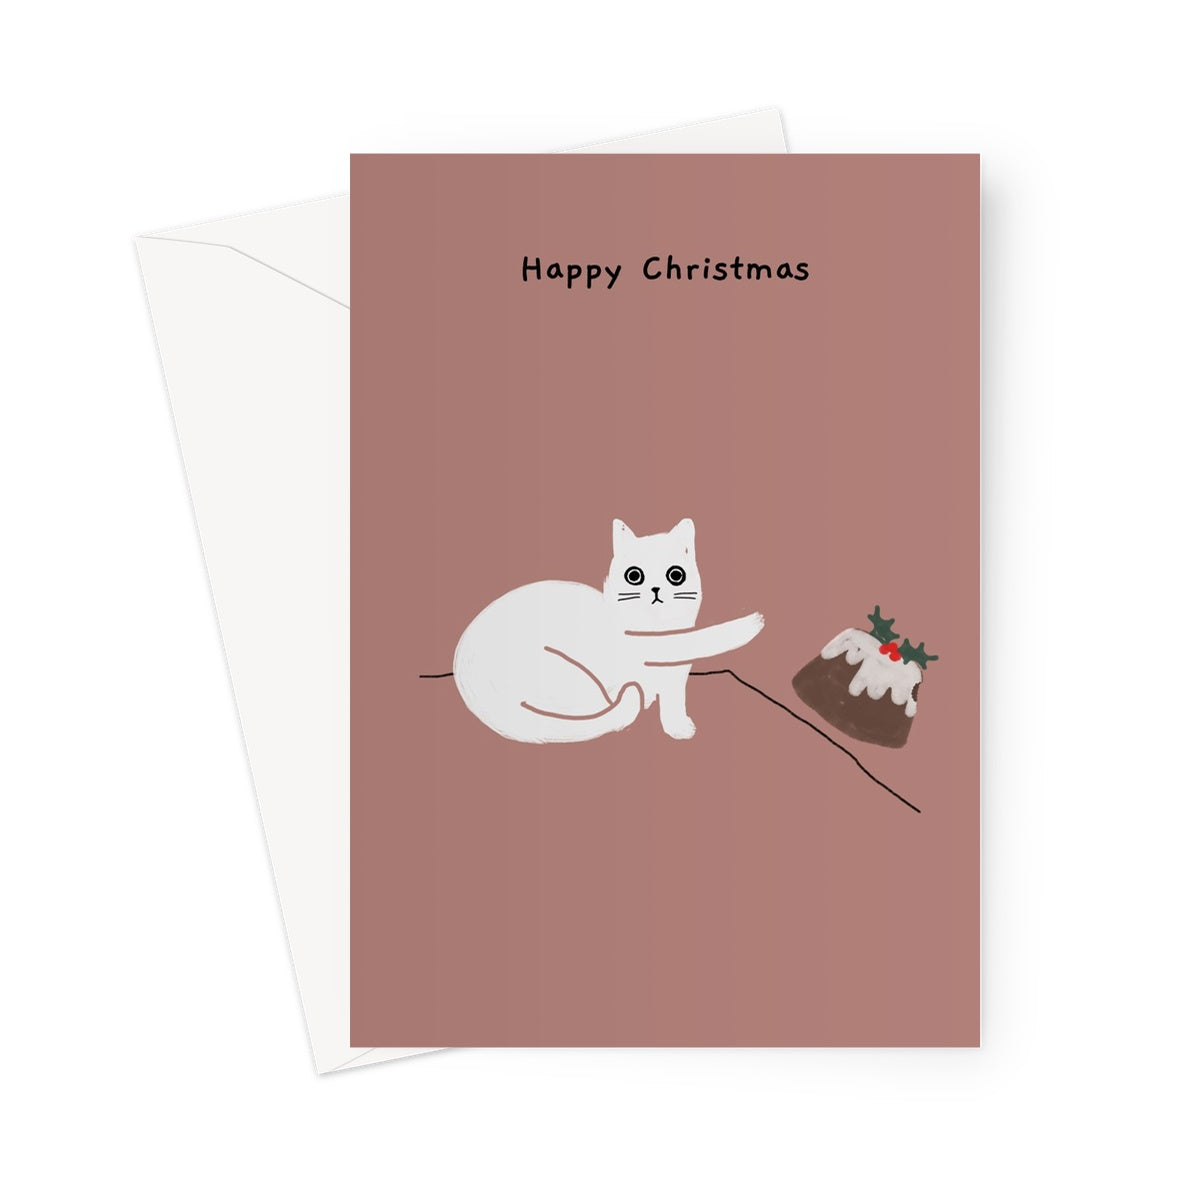 Ken the Cat funny Christmas card for cat lovers - Christmas pudding